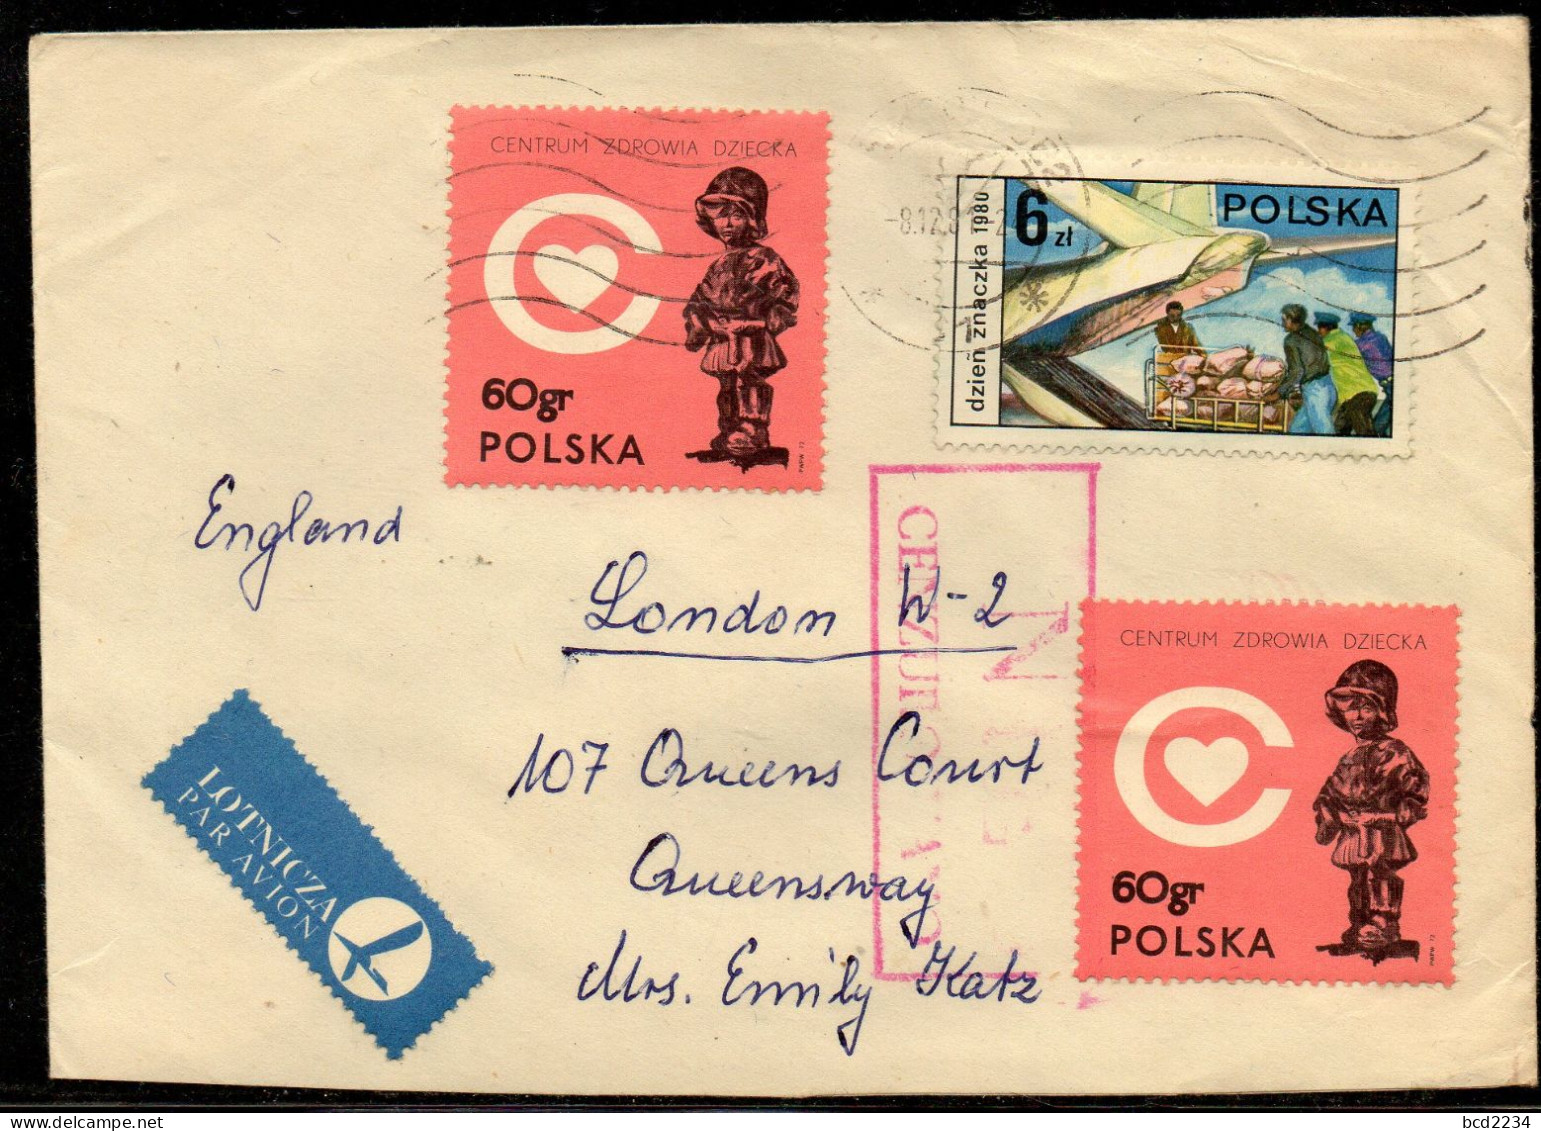 POLAND 1981 SOLIDARITY SOLIDARNOSC PERIOD MARTIAL LAW NIE CENZUROWANO NOT CENSORED MAUVE CACHET TO LONDON - Lettres & Documents